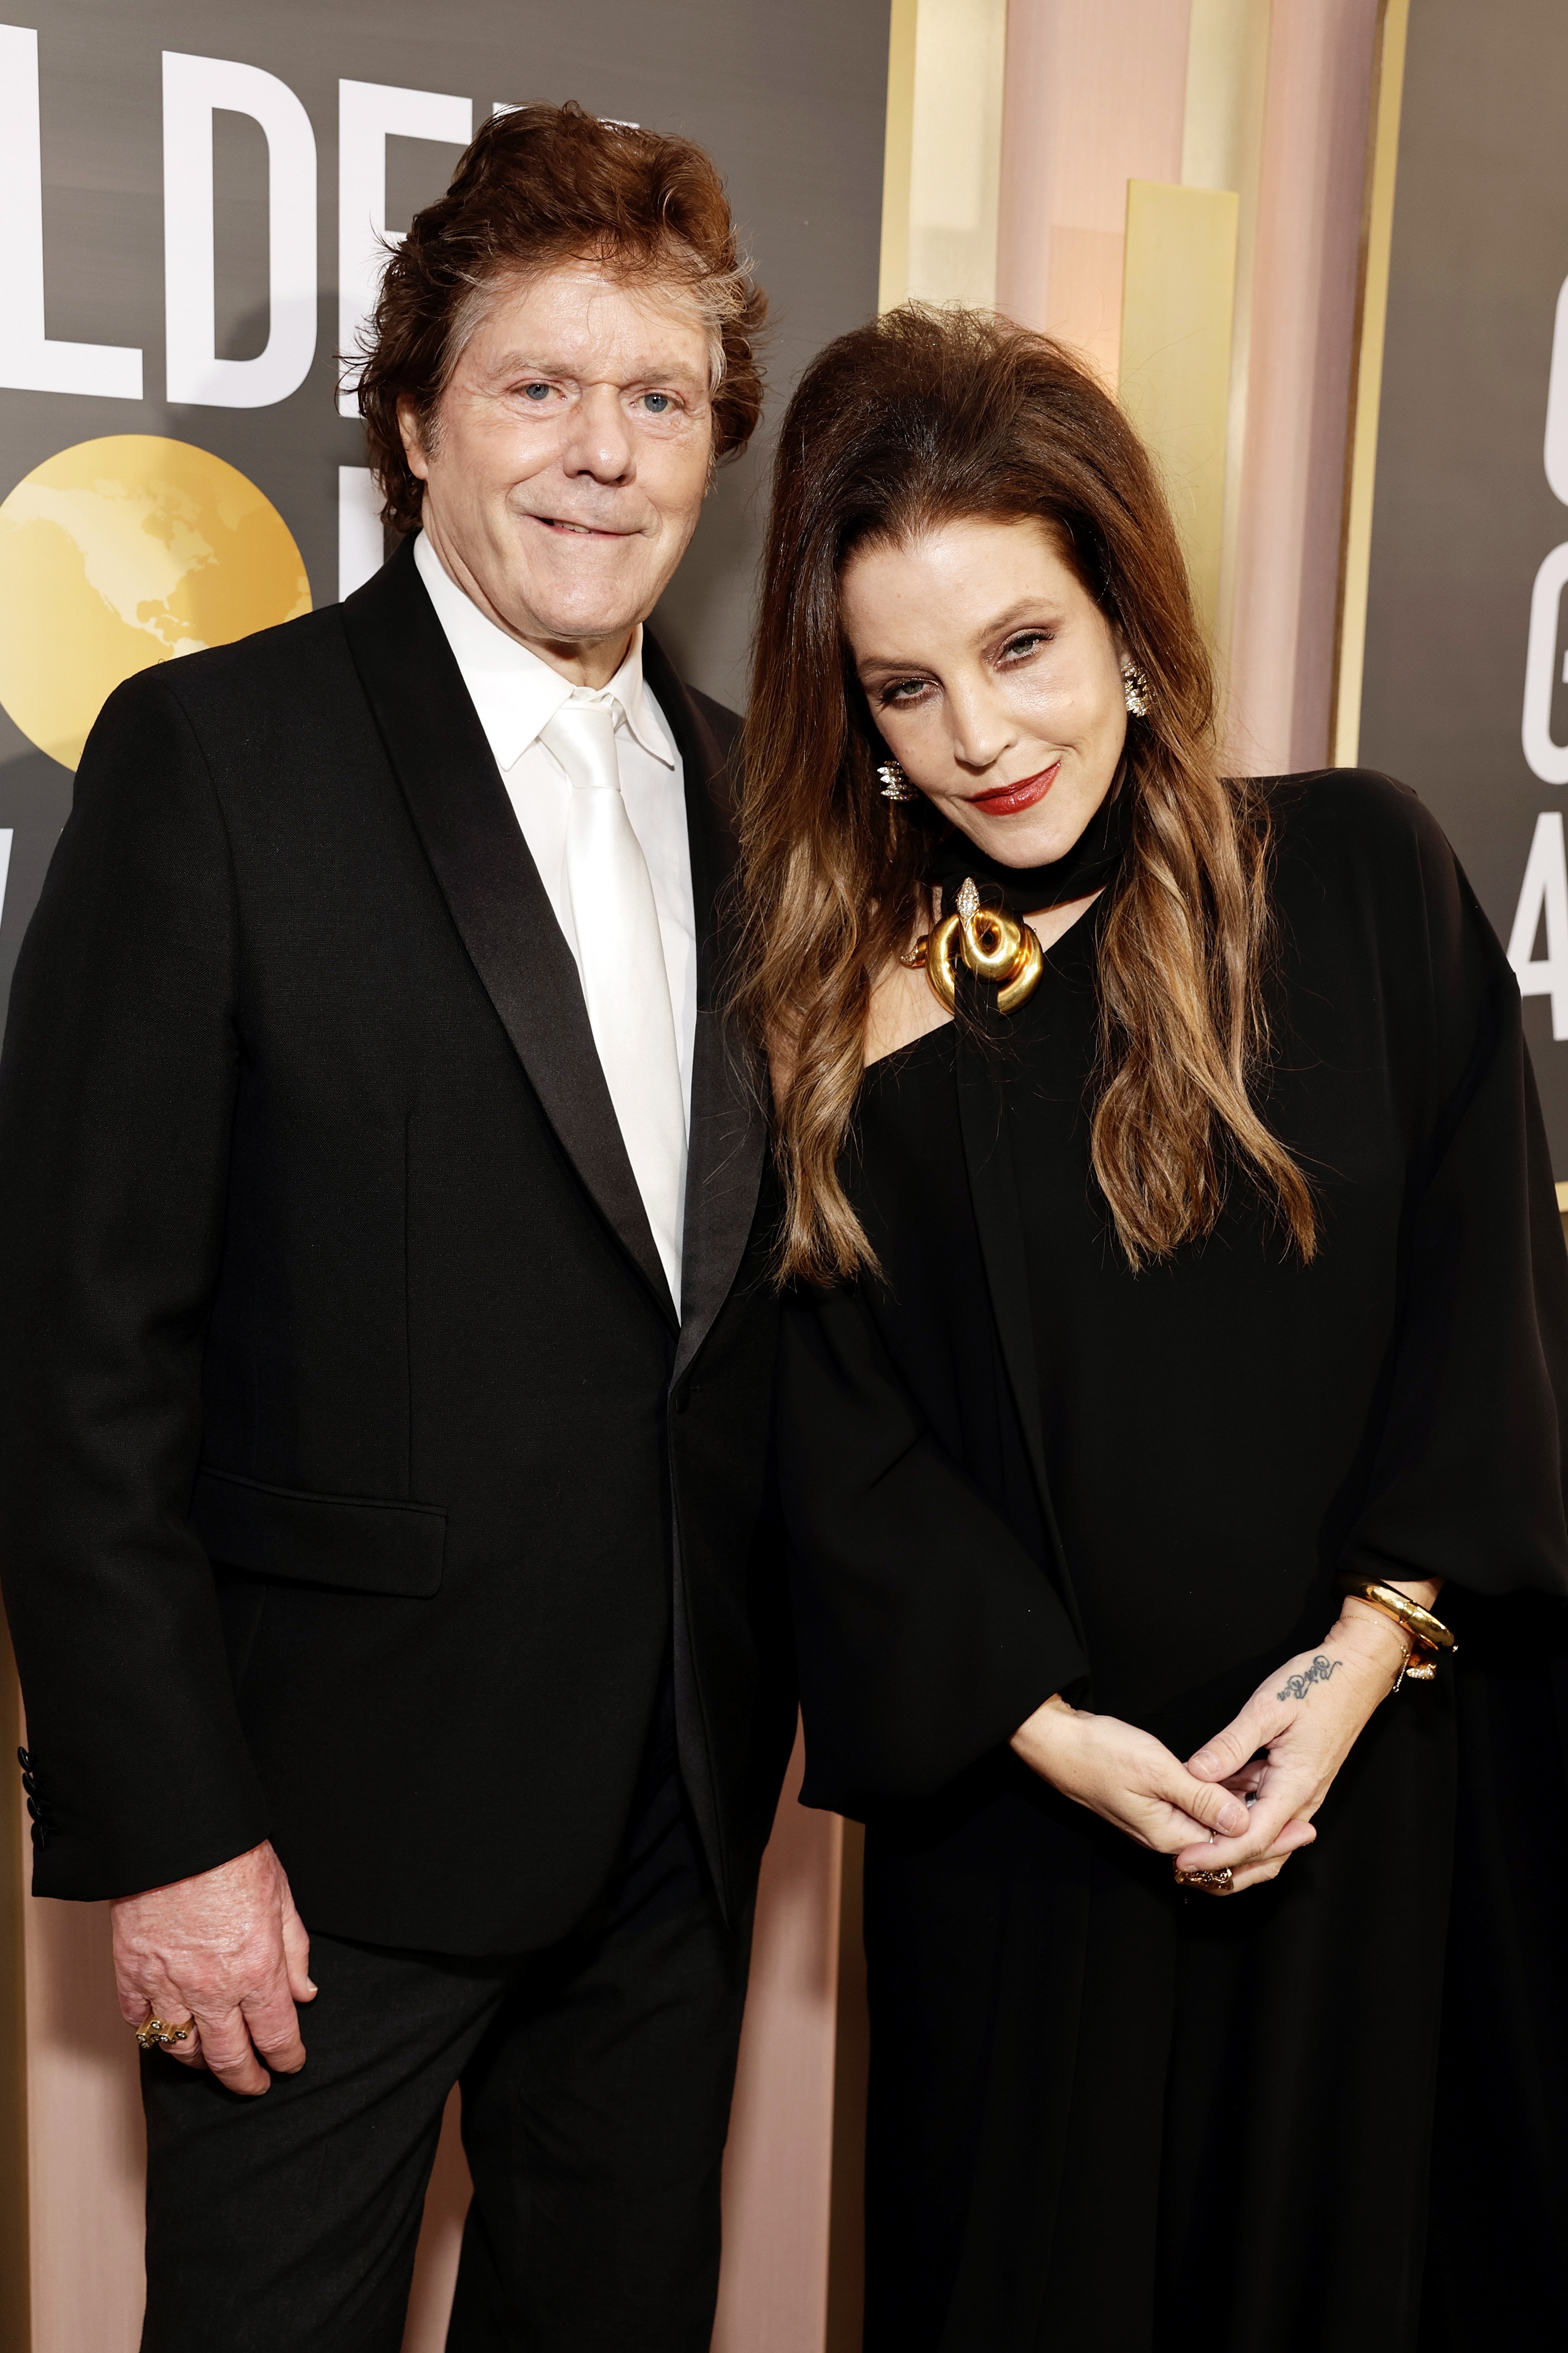 Jerry Schilling and Lisa Marie Presley at the 80th Annual Golden Globe Awards on January 11, 2023, in Beverly Hills, California | Source: Getty Images